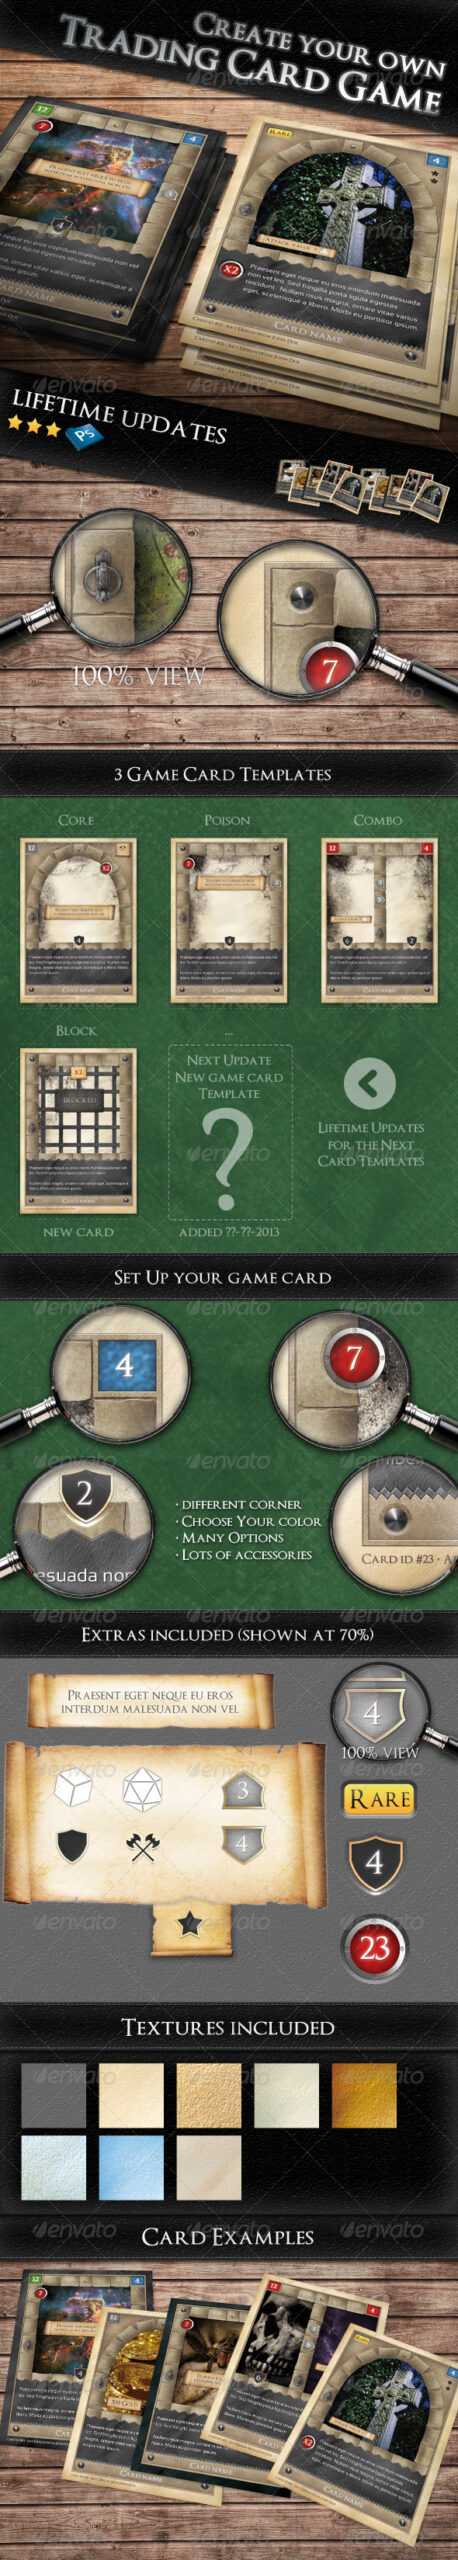 Card Game Graphics, Designs & Templates From Graphicriver Pertaining To Card Game Template Maker